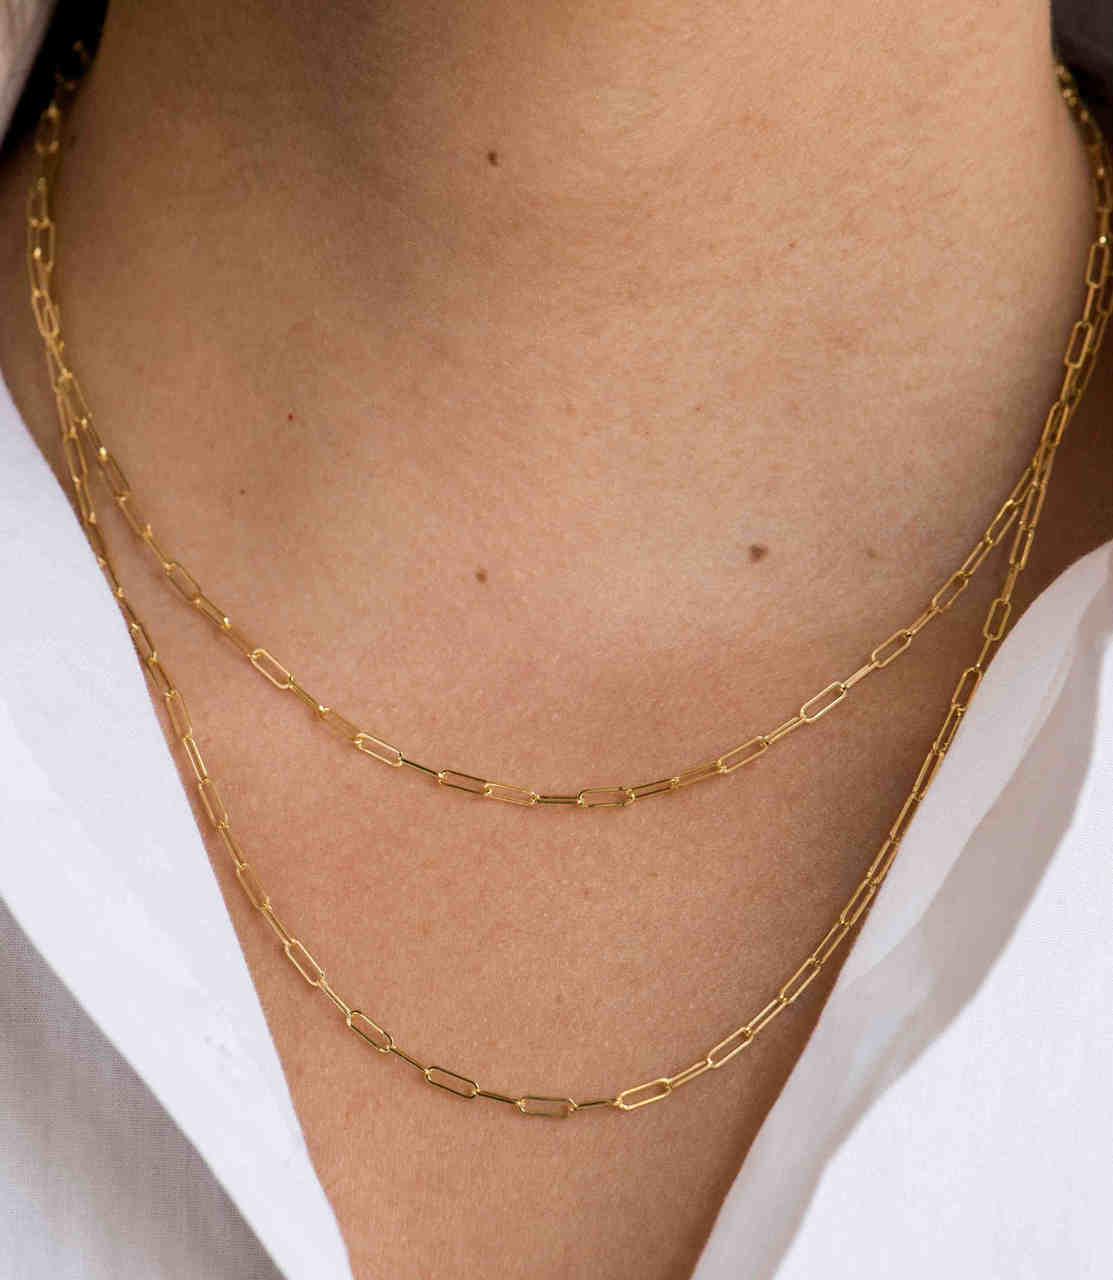 Open Link Chain Necklace